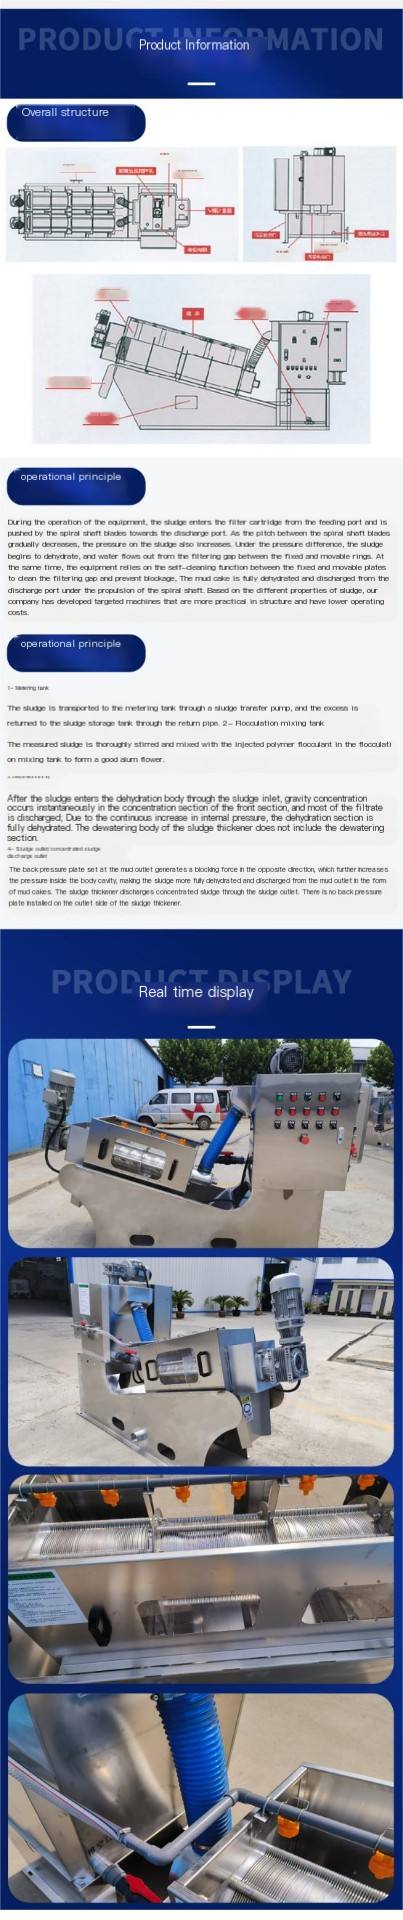 Stacked screw type sludge dewatering machine, Dashengchang environmental protection equipment, textile and chemical sludge separation equipment, with sturdy materials